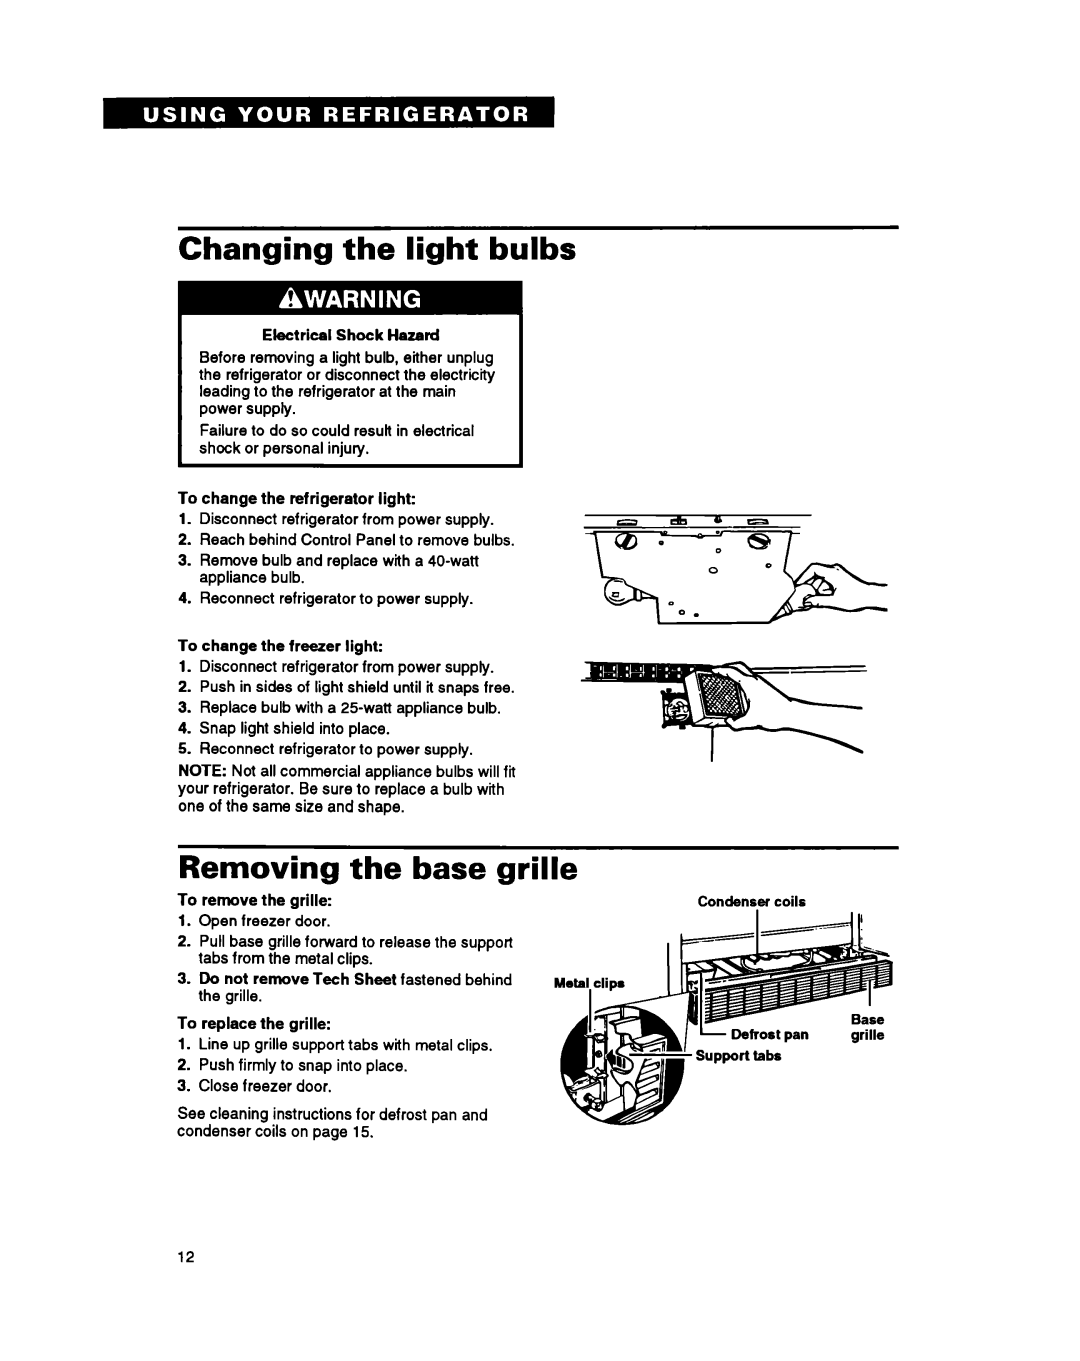 Whirlpool RT25BK warranty Changing the light bulbs, Removing the base grille 